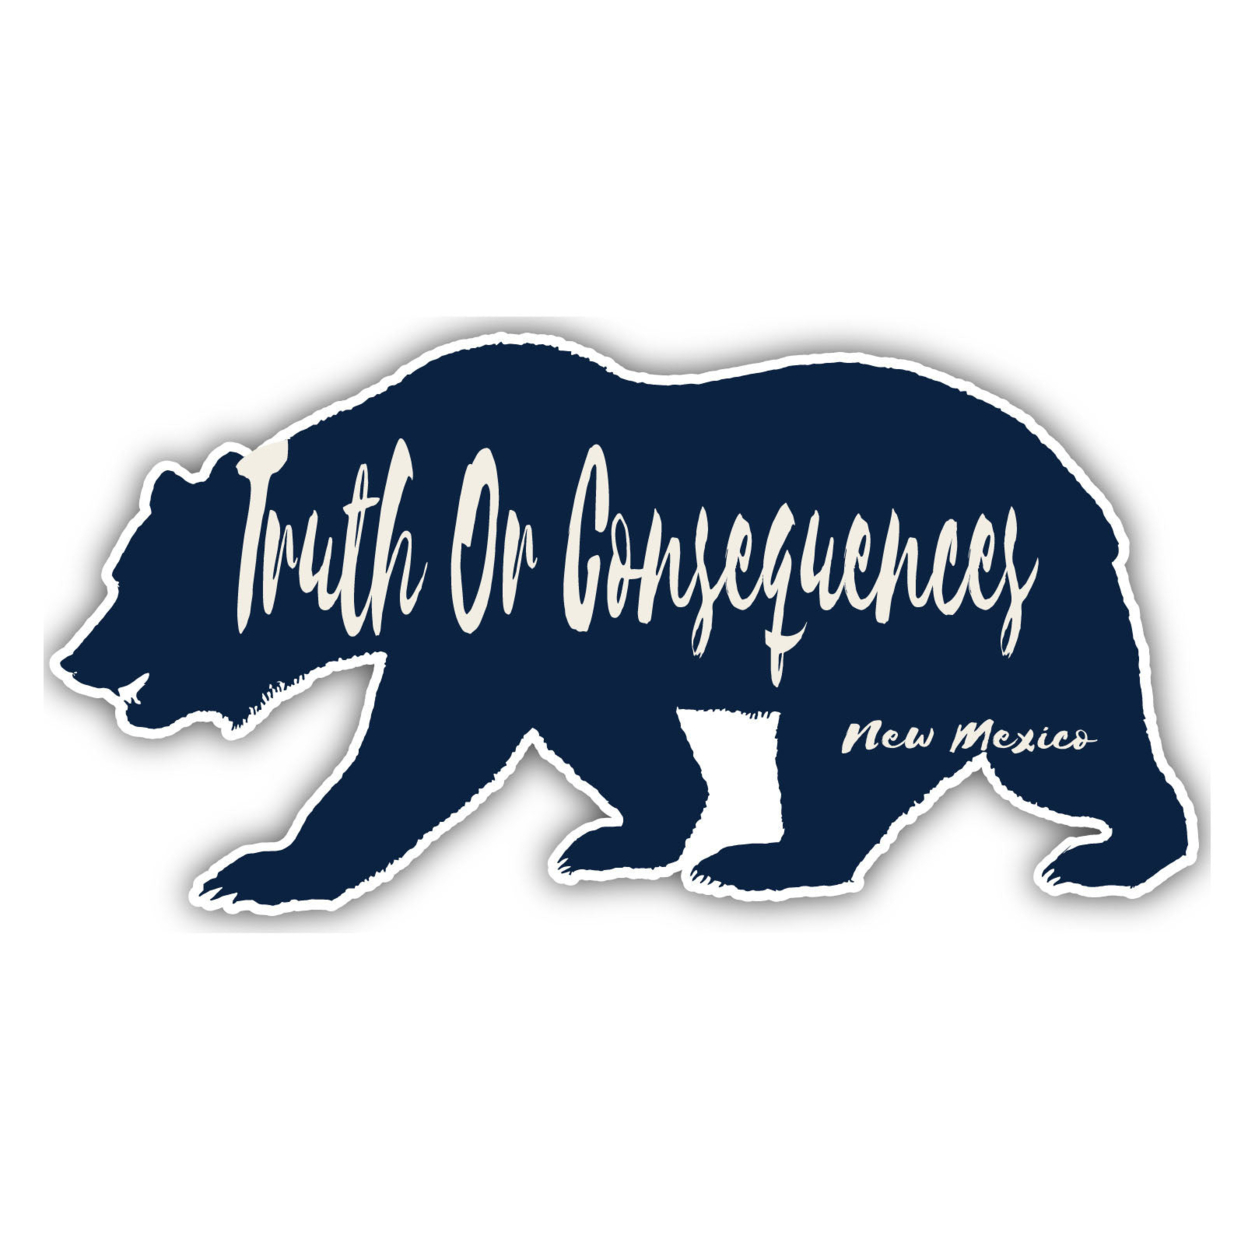 Truth Or Consequences New Mexico Souvenir Decorative Stickers (Choose Theme And Size) - Single Unit, 4-Inch, Camp Life